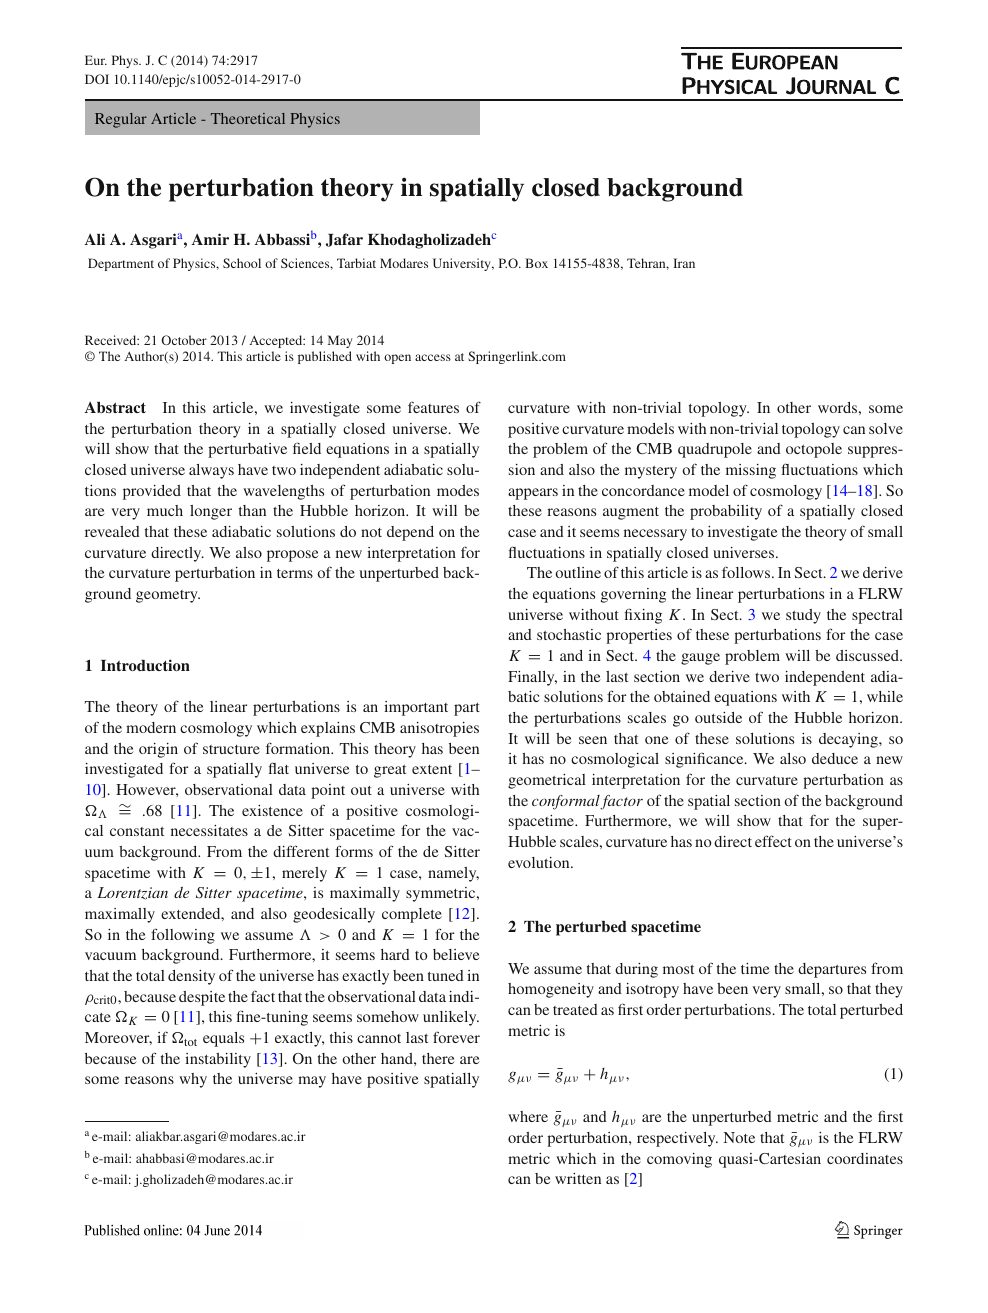 On The Perturbation Theory In Spatially Closed Background Topic Of Research Paper In Physical Sciences Download Scholarly Article Pdf And Read For Free On Cyberleninka Open Science Hub